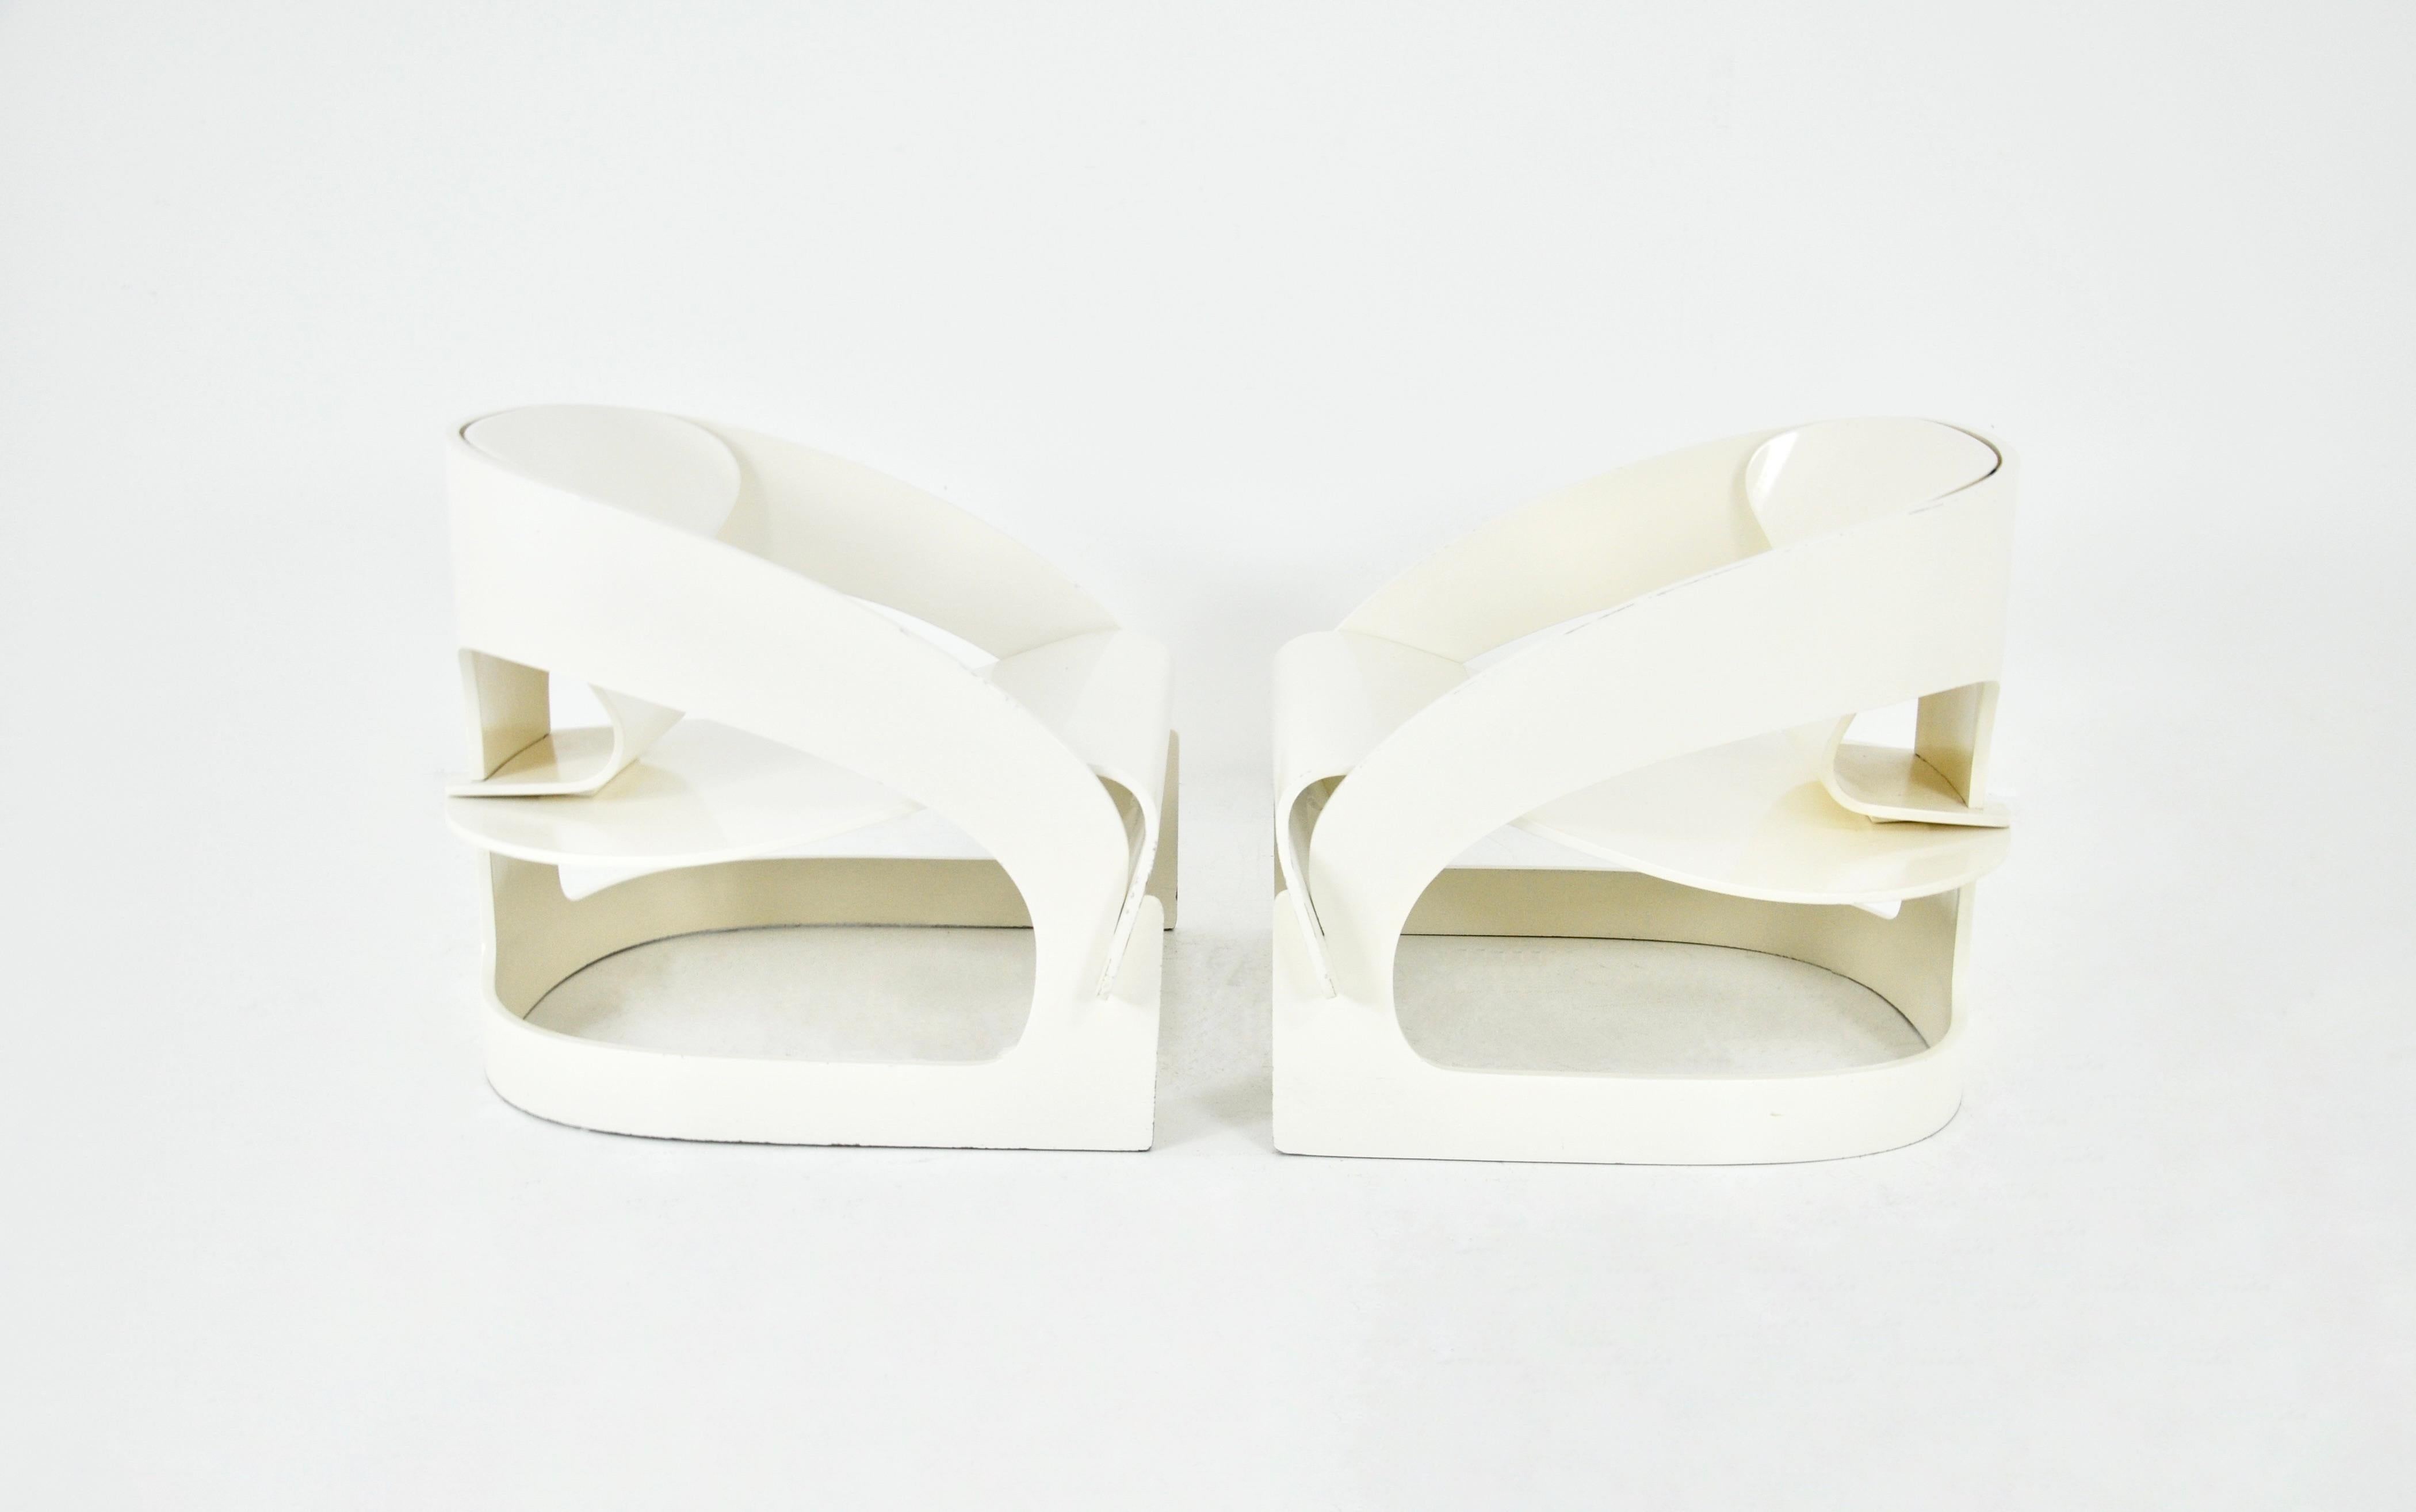 Wood Model 4801 Armchairs by Joe Colombo for Kartell, 1960s, set of 2 For Sale